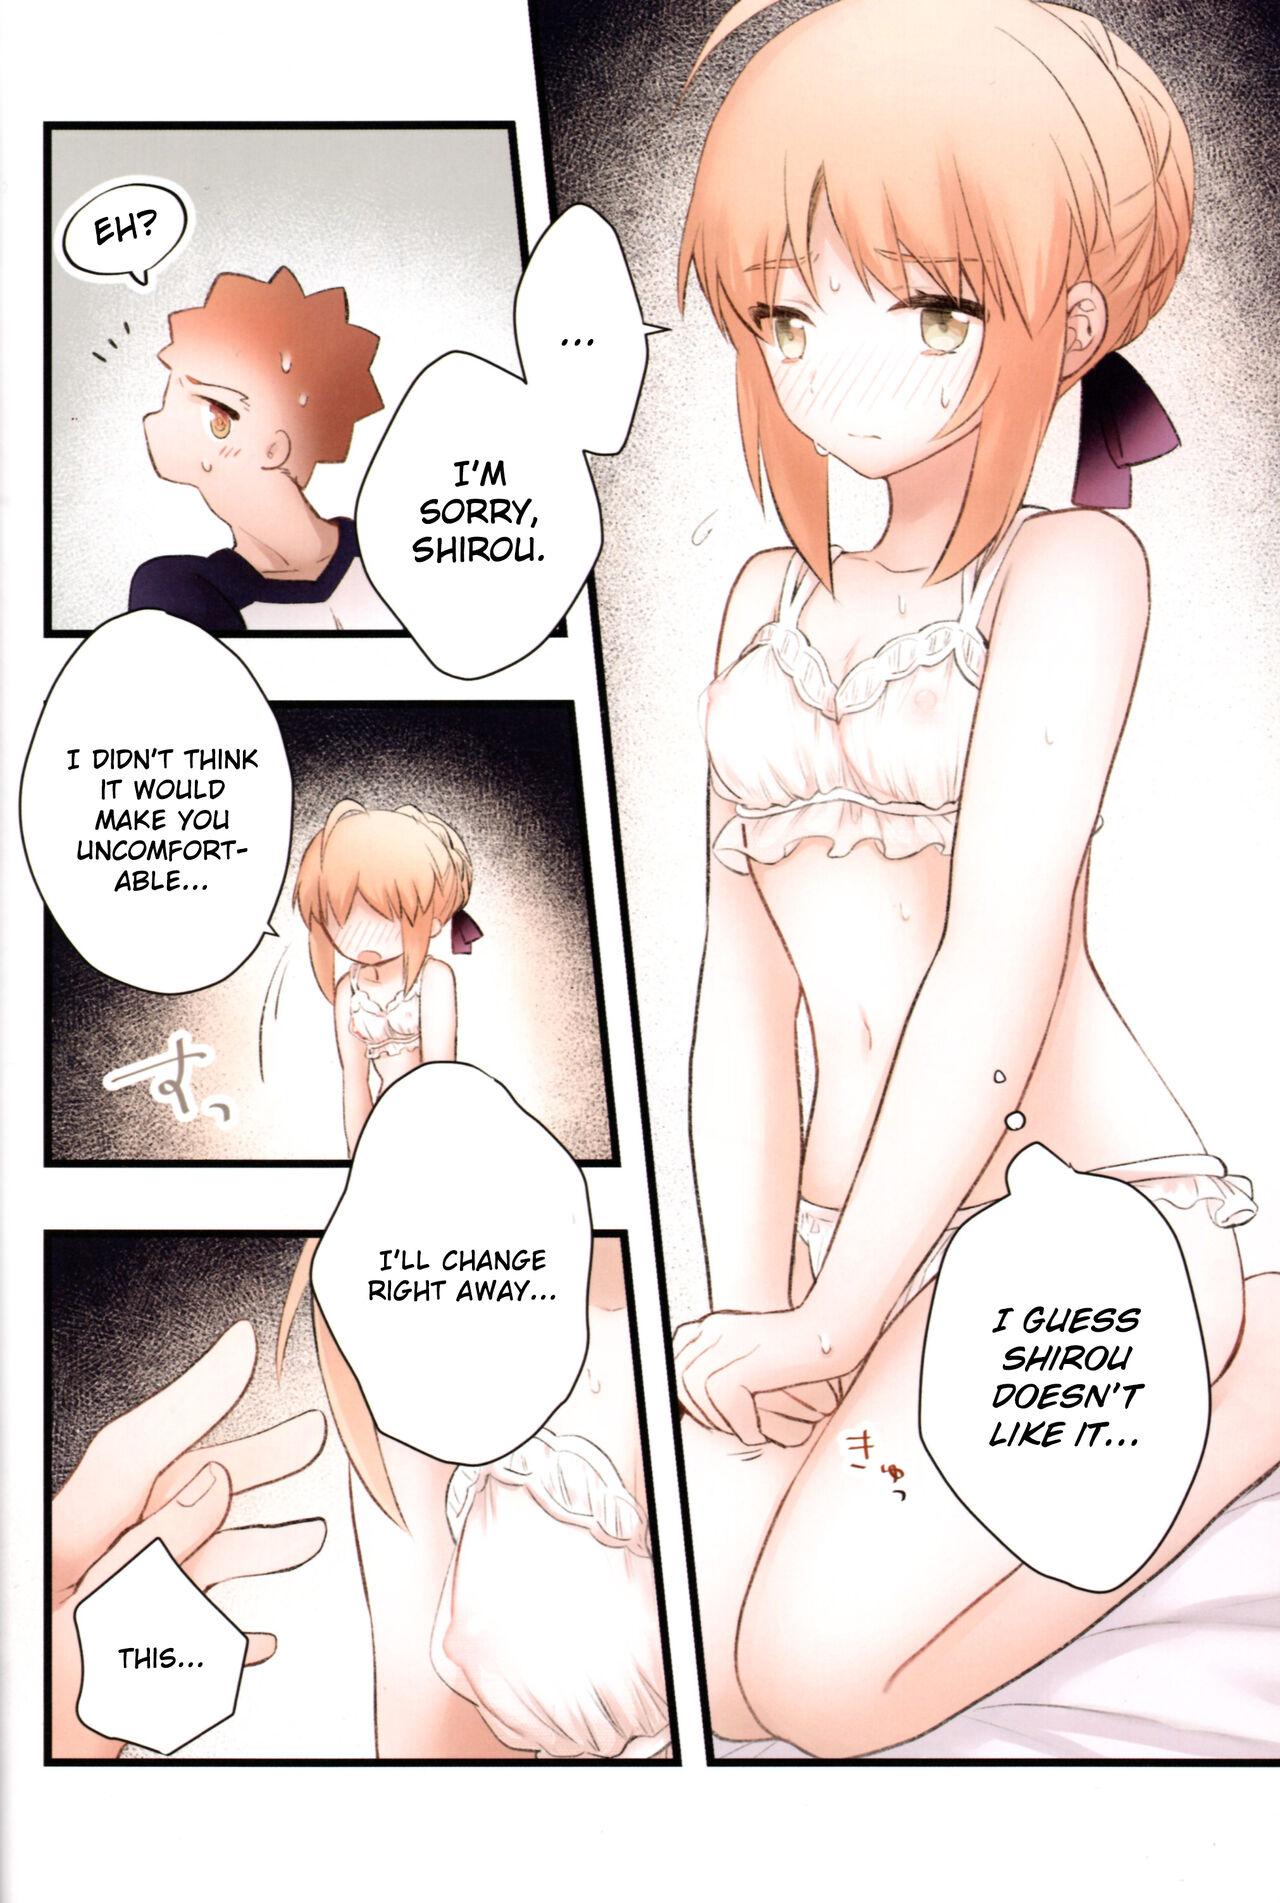 Ohmibod Souiu Shitagi wa Ore ni wa Hayai | This kind of underwear is too much for me. - Fate stay night First Time - Page 9